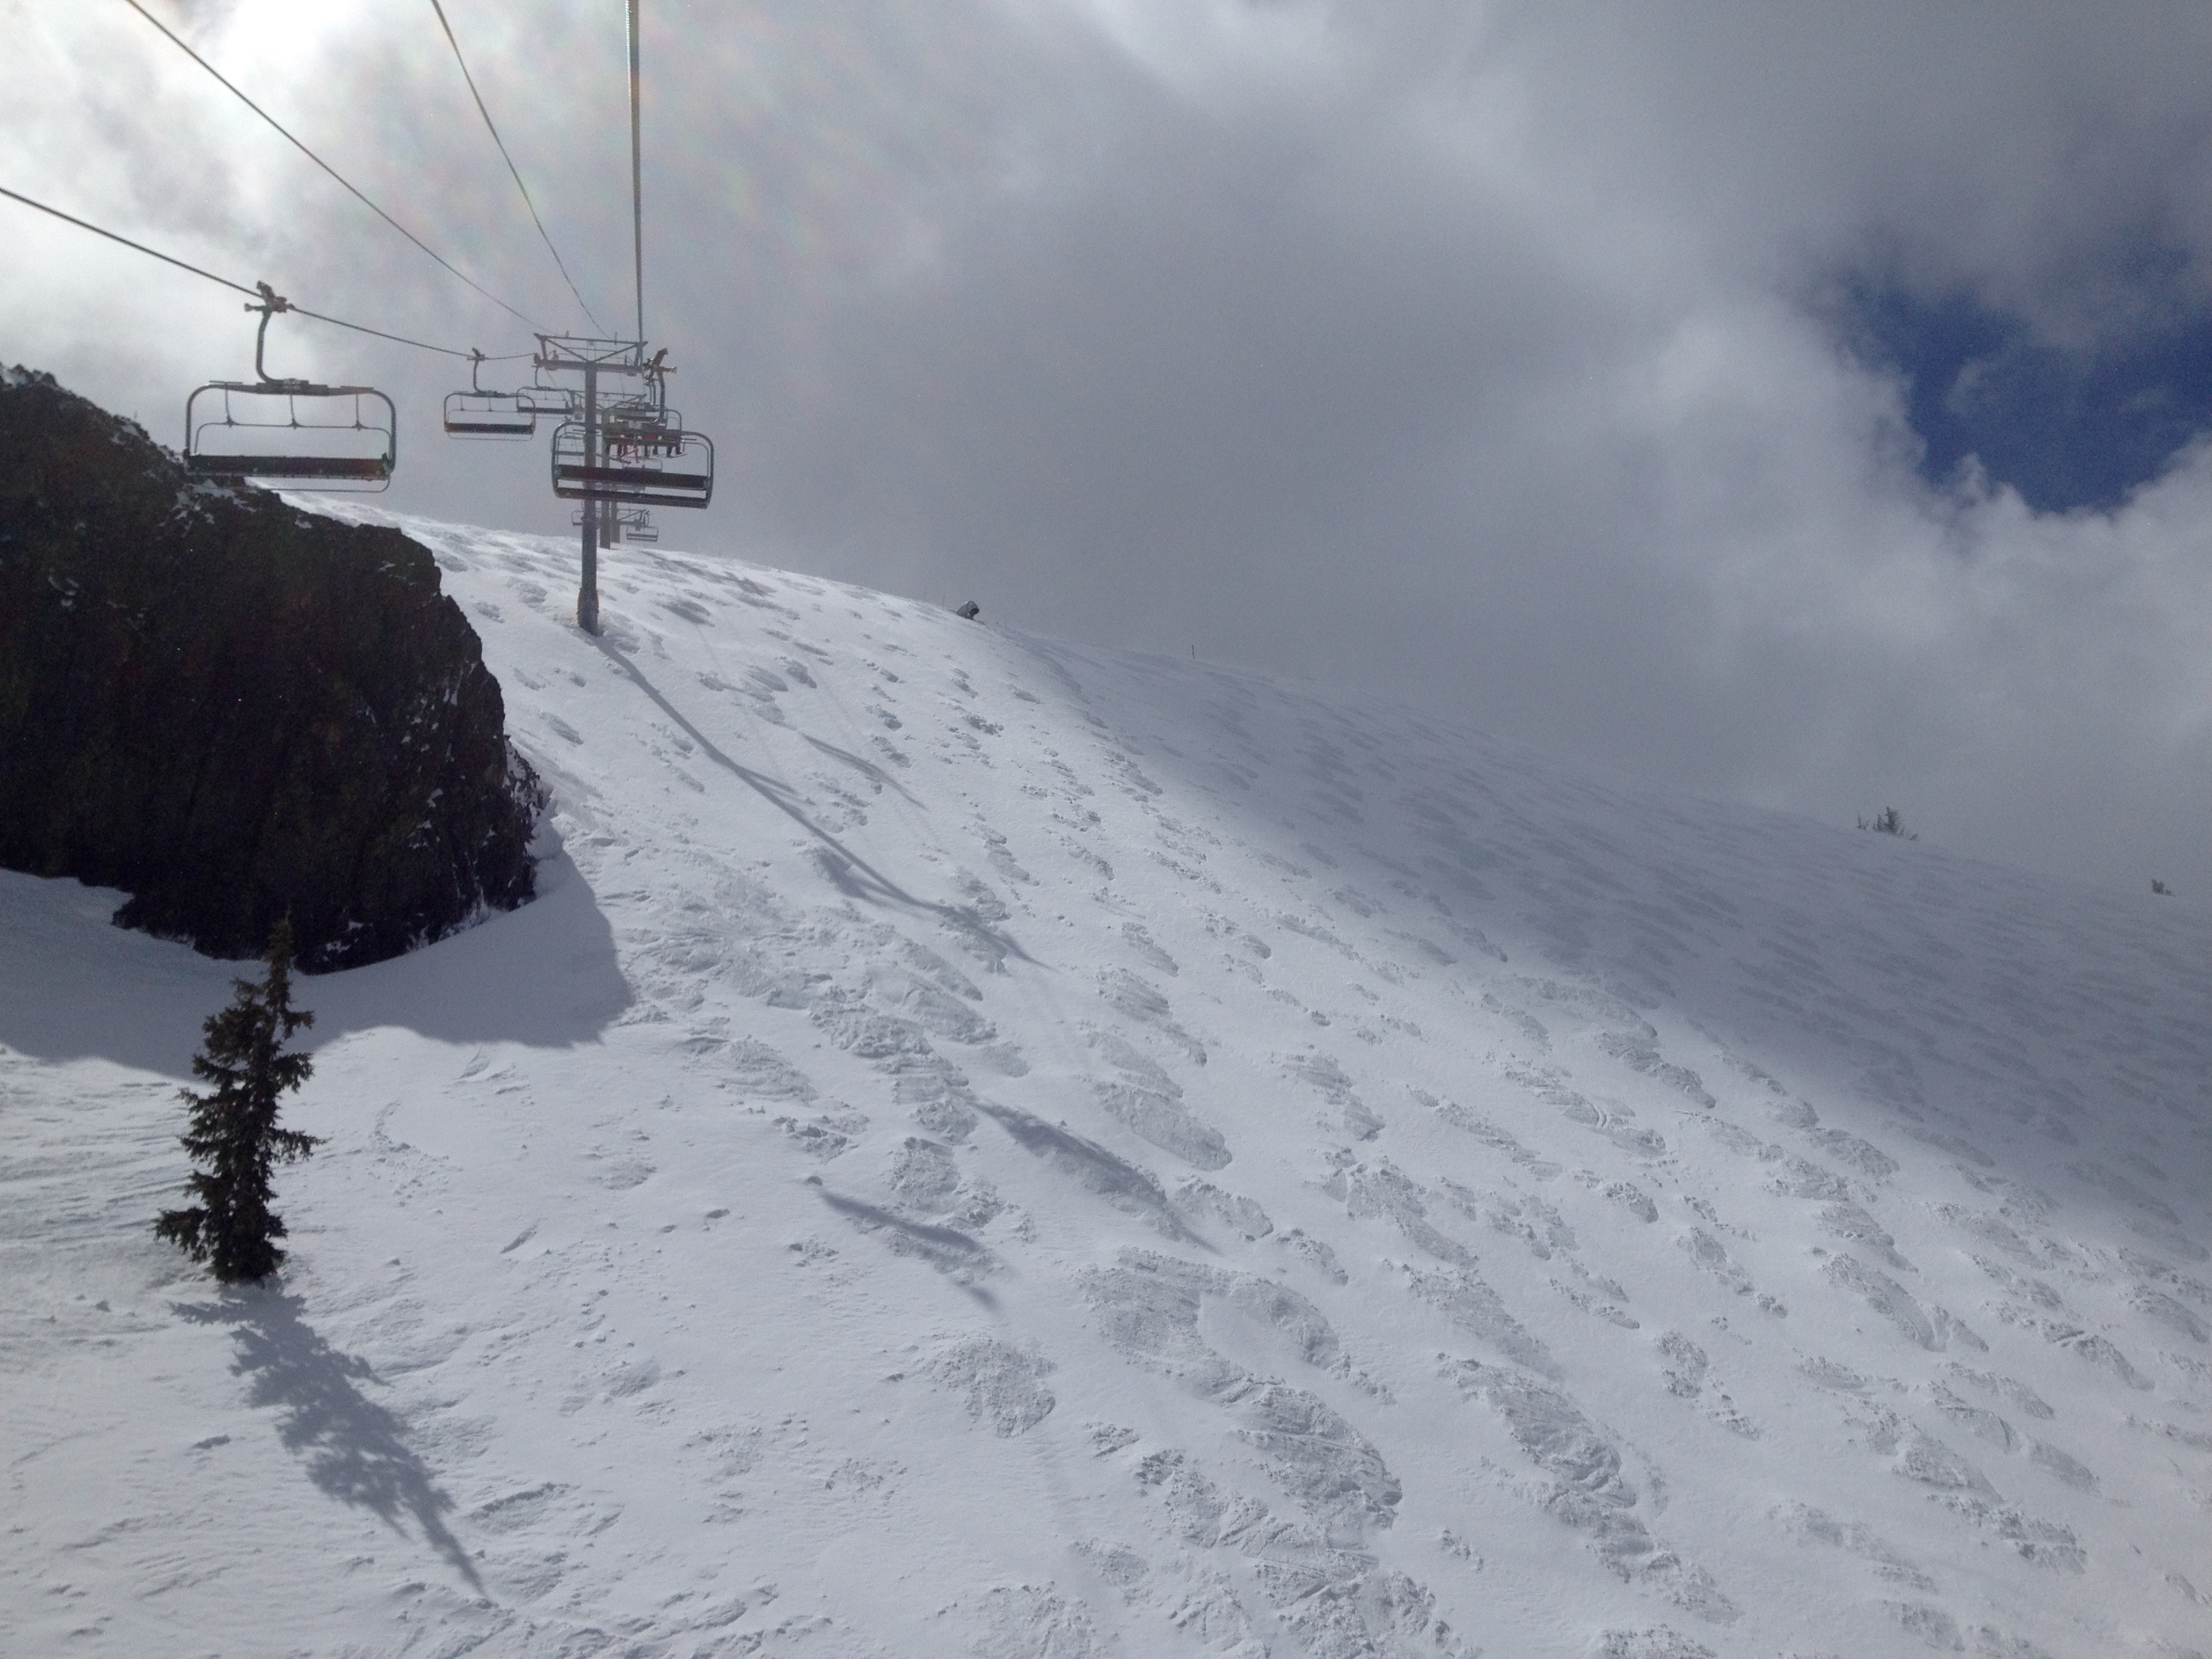 Headwall face went un-skied today.